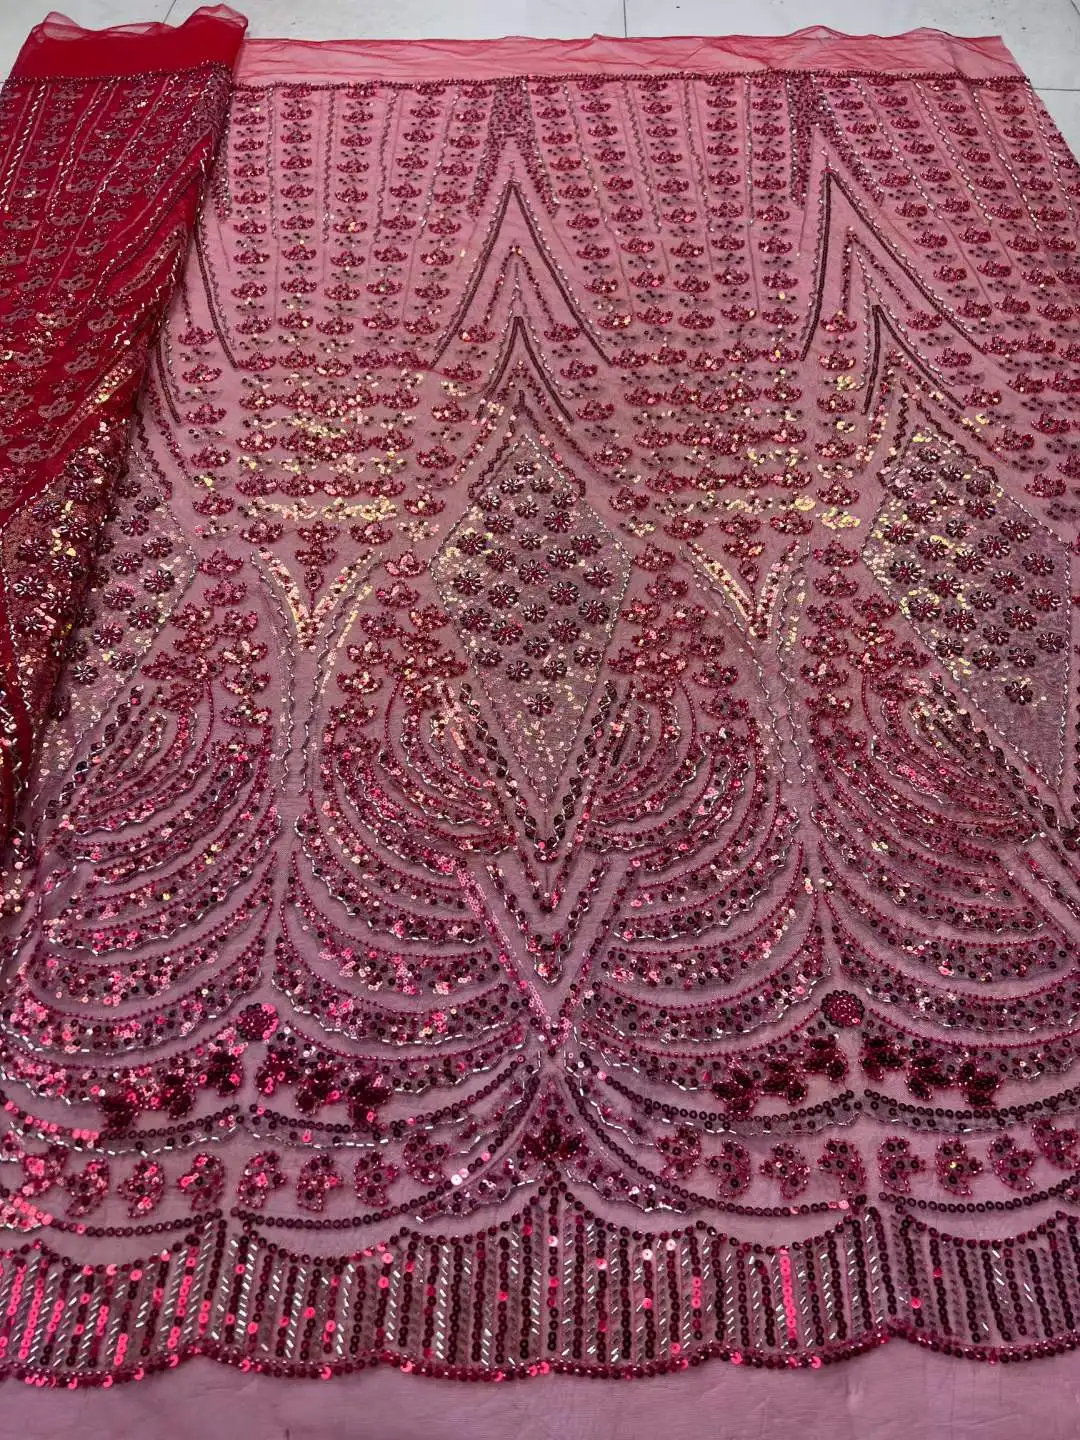 

High Quality Mesh Lace Fabric Tulle Embroidery Stack Sequins Bead Craft Nigerian Sewing Party Wedding Dress 5 Yards Wholesale